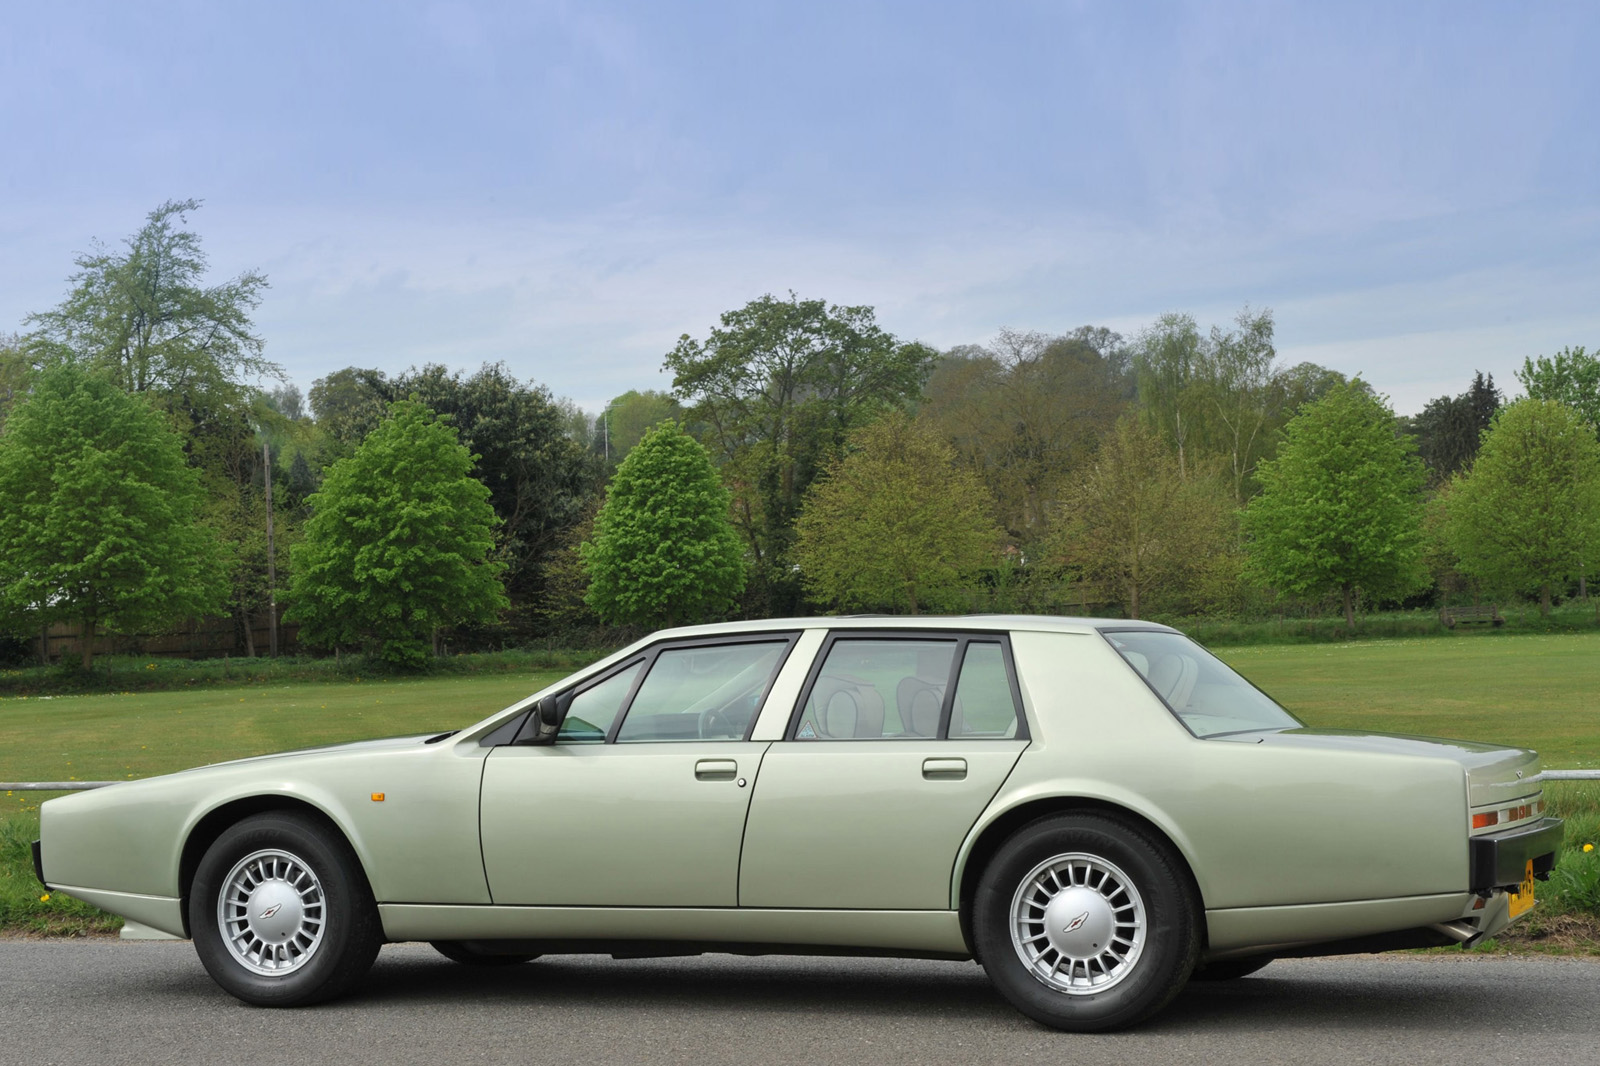 Buy An Aston Martin Lagonda – It’s An Investment Say Specialists | Carscoops1600 x 1066